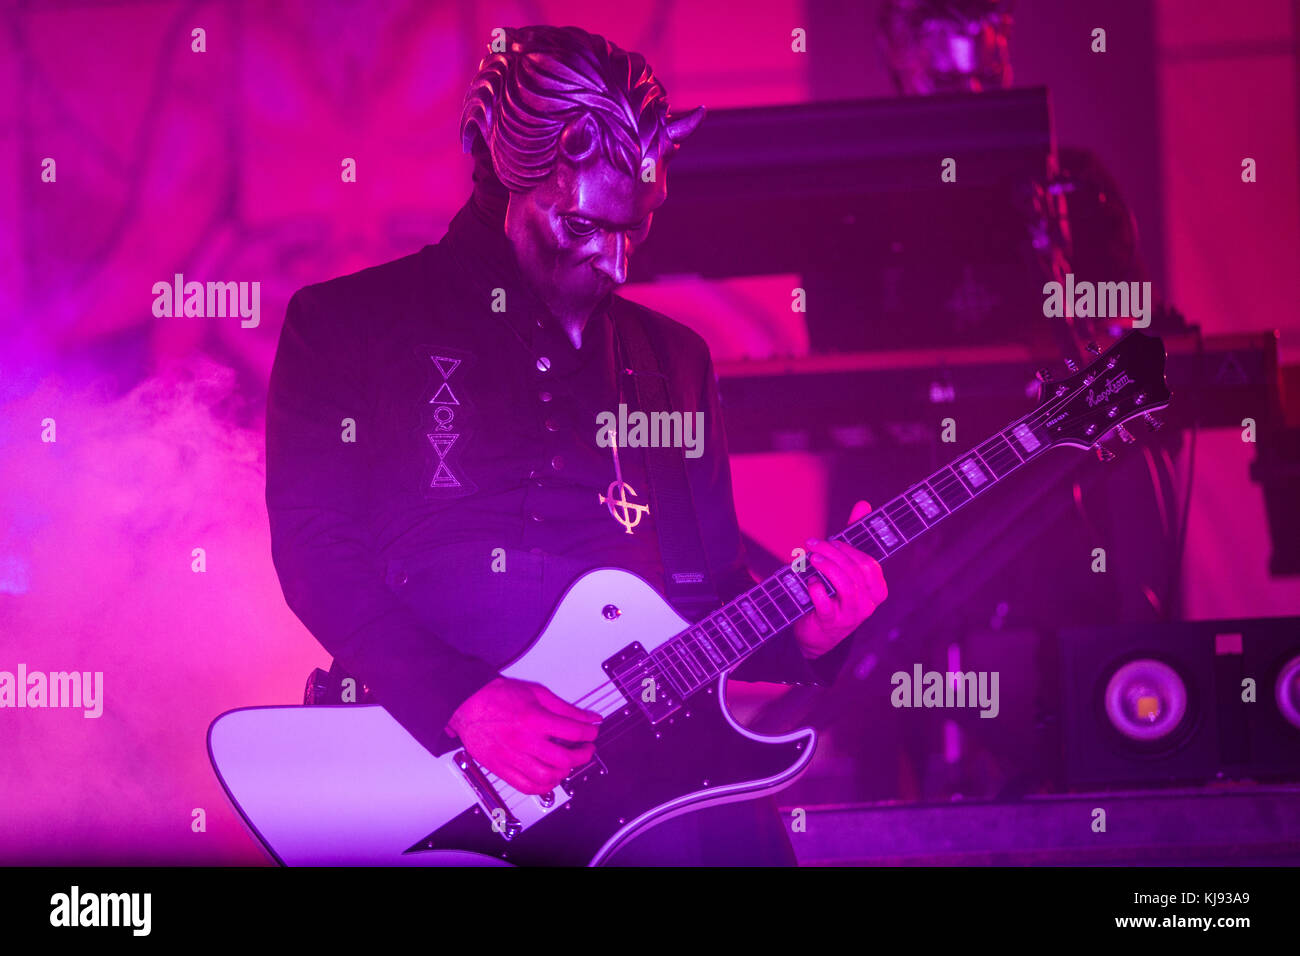 Denmark, Valby - April 26, 2017. The Swedish doom metal band Ghost performs a live concert at Valbyhallen. Except for the vocalist, Papa Emeritus, all band members are refereed to as Nameless Ghouls (pictured). (Photo credit: Gonzales Photo - Thomas Rasmussen). Stock Photo